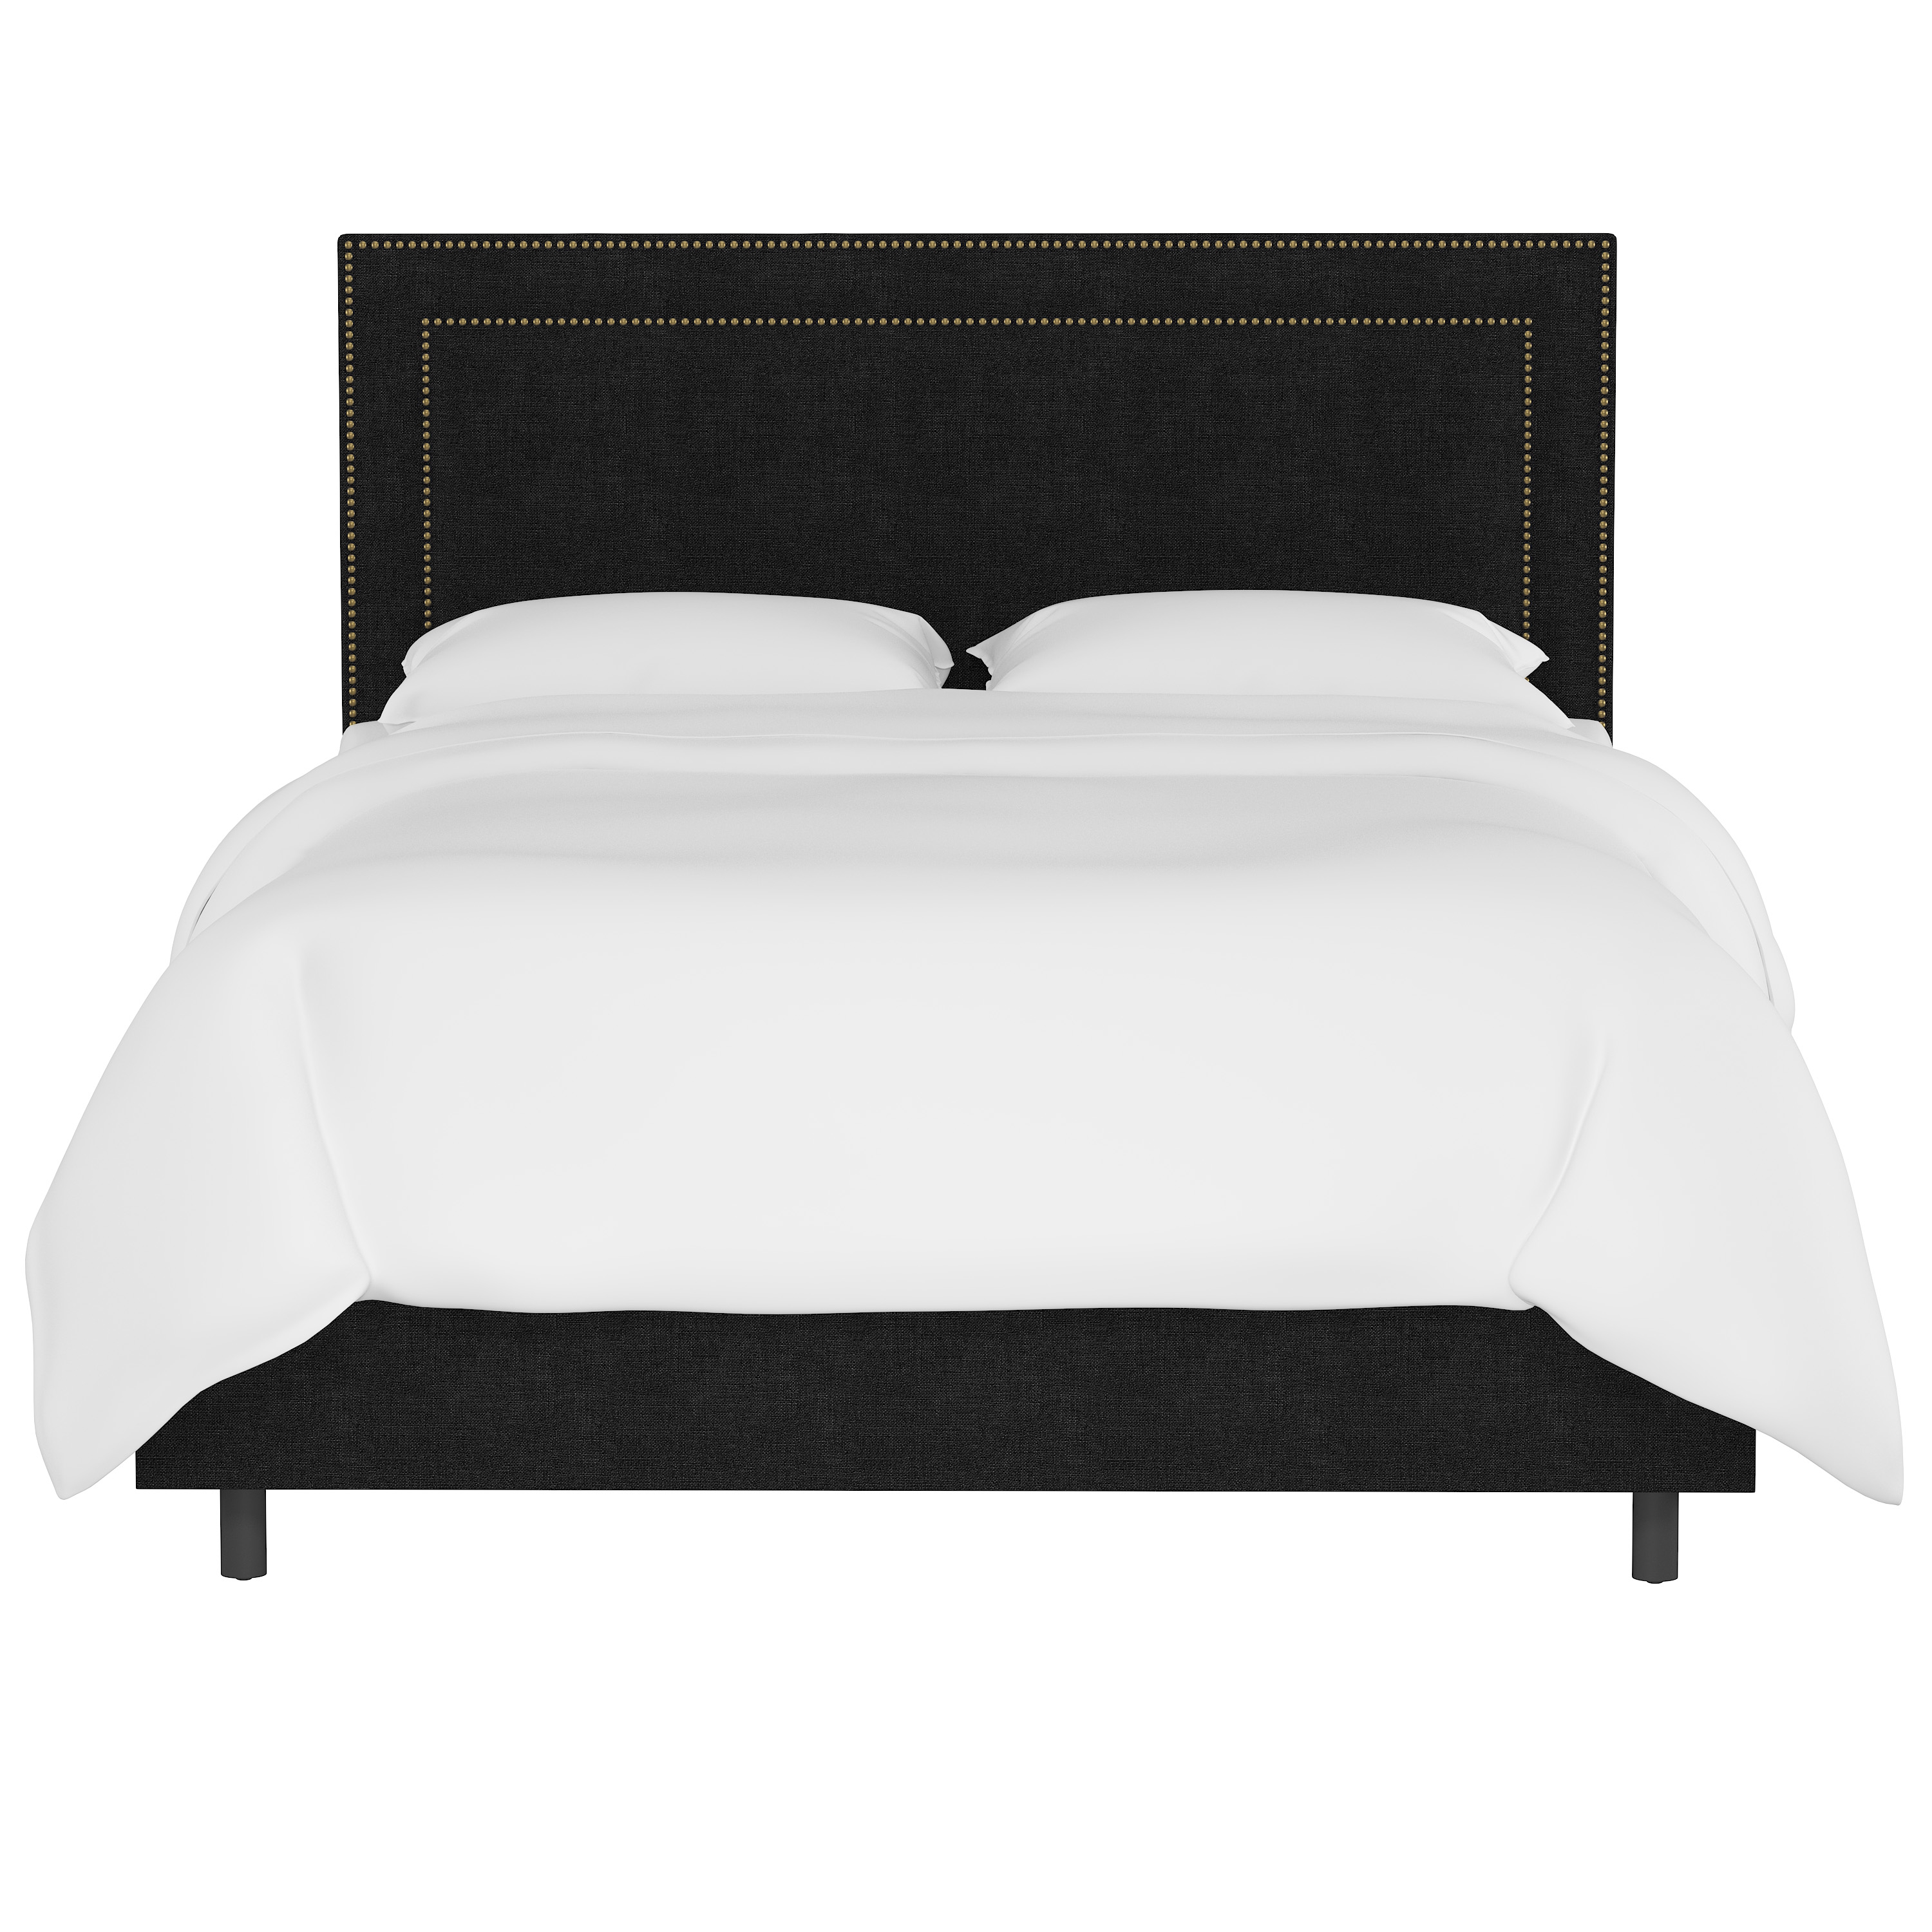 Queen Kimball Bed, Brass Nailheads - Image 1